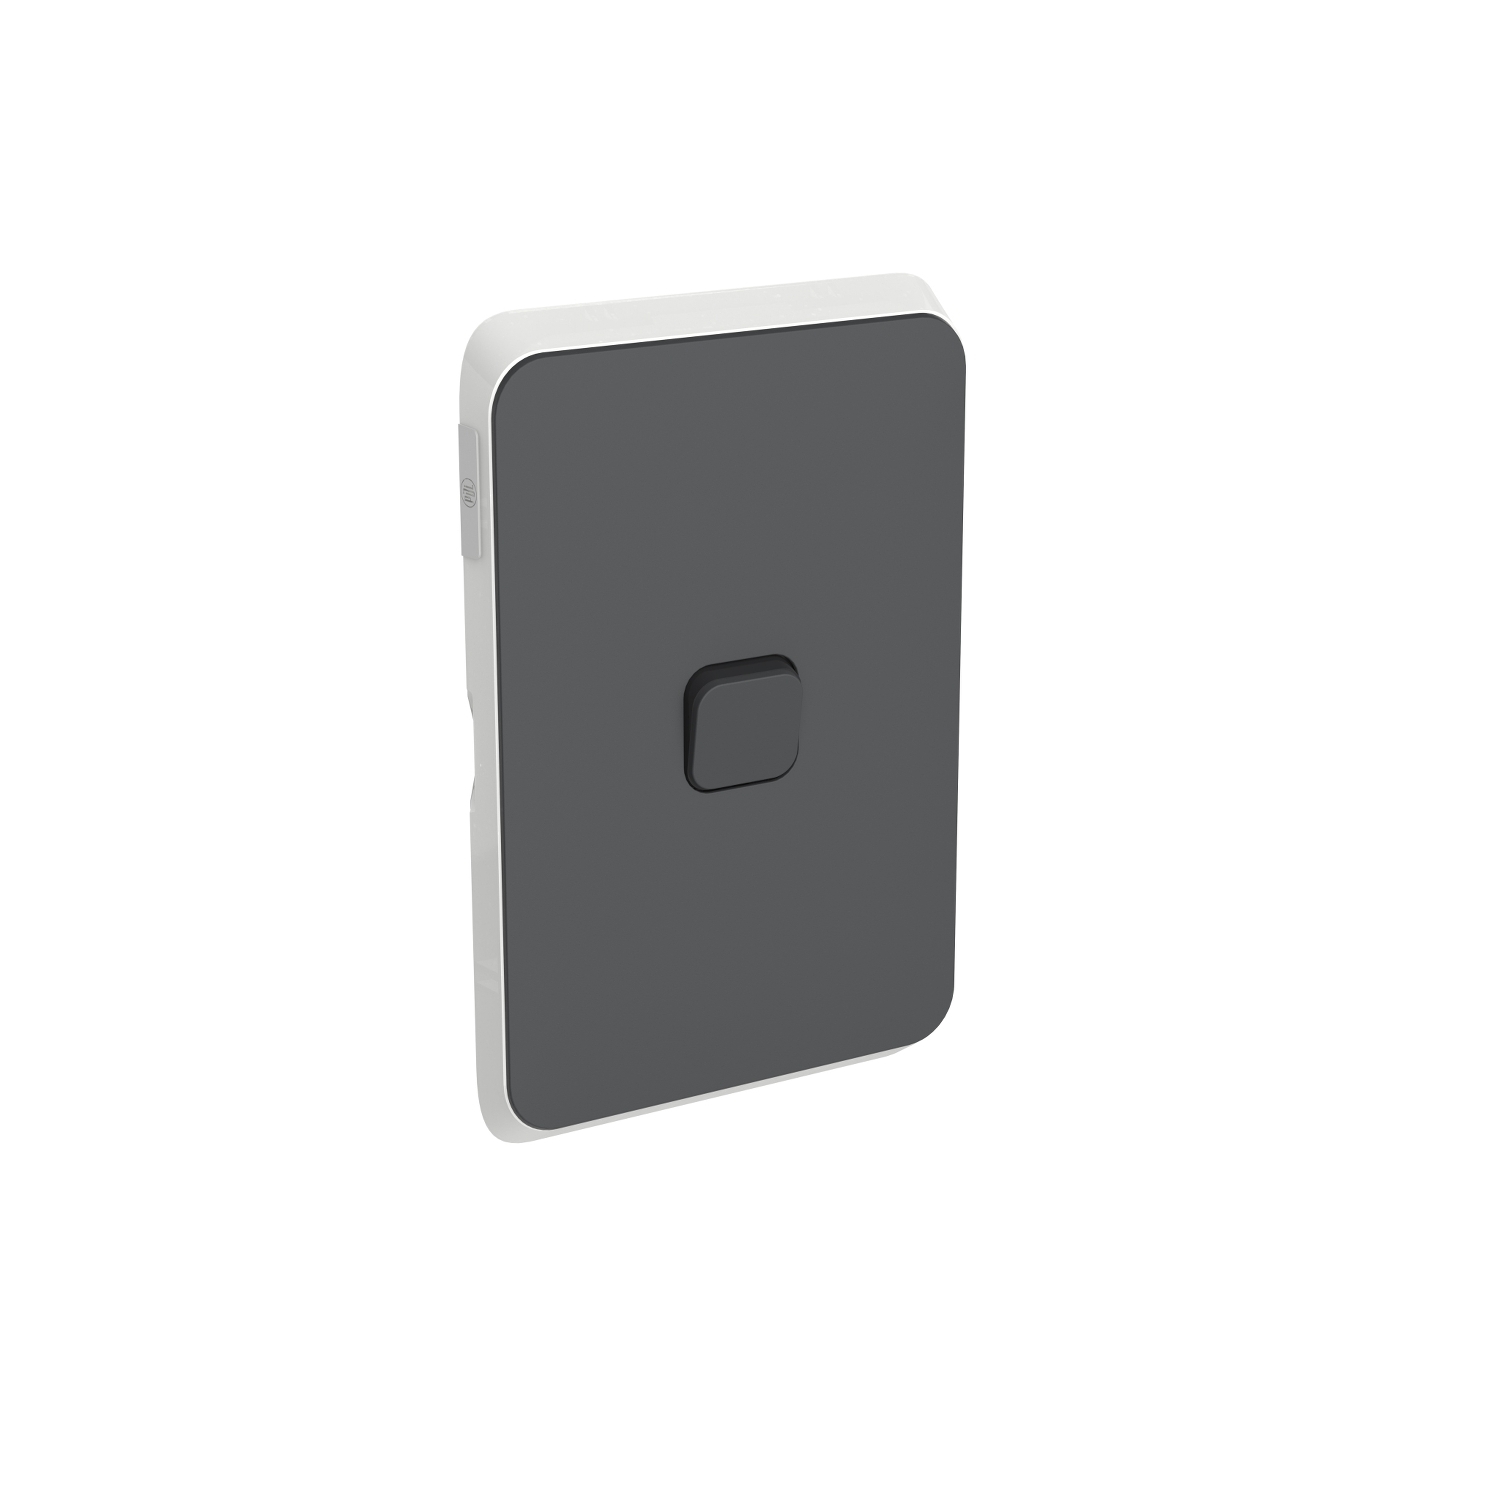 PDL381C-AN - PDL Iconic Cover Plate Switch 1Gang - Anthracite